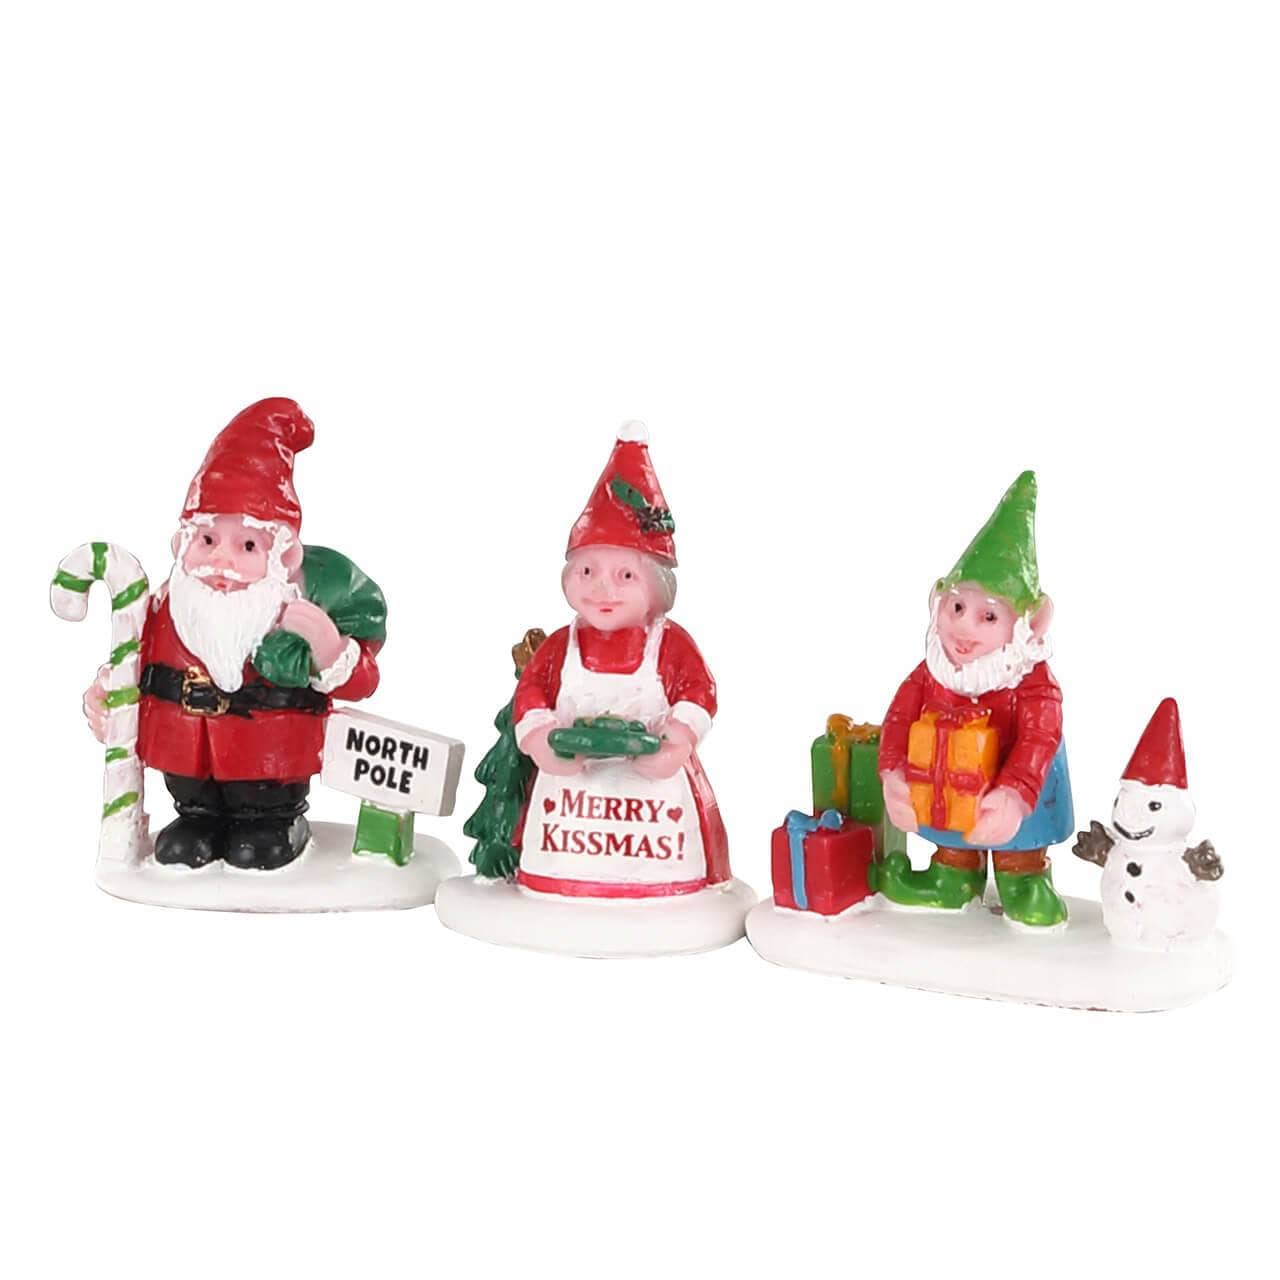 Lemax Accessory Lemax Christmas Garden Gnomes, Set of 3